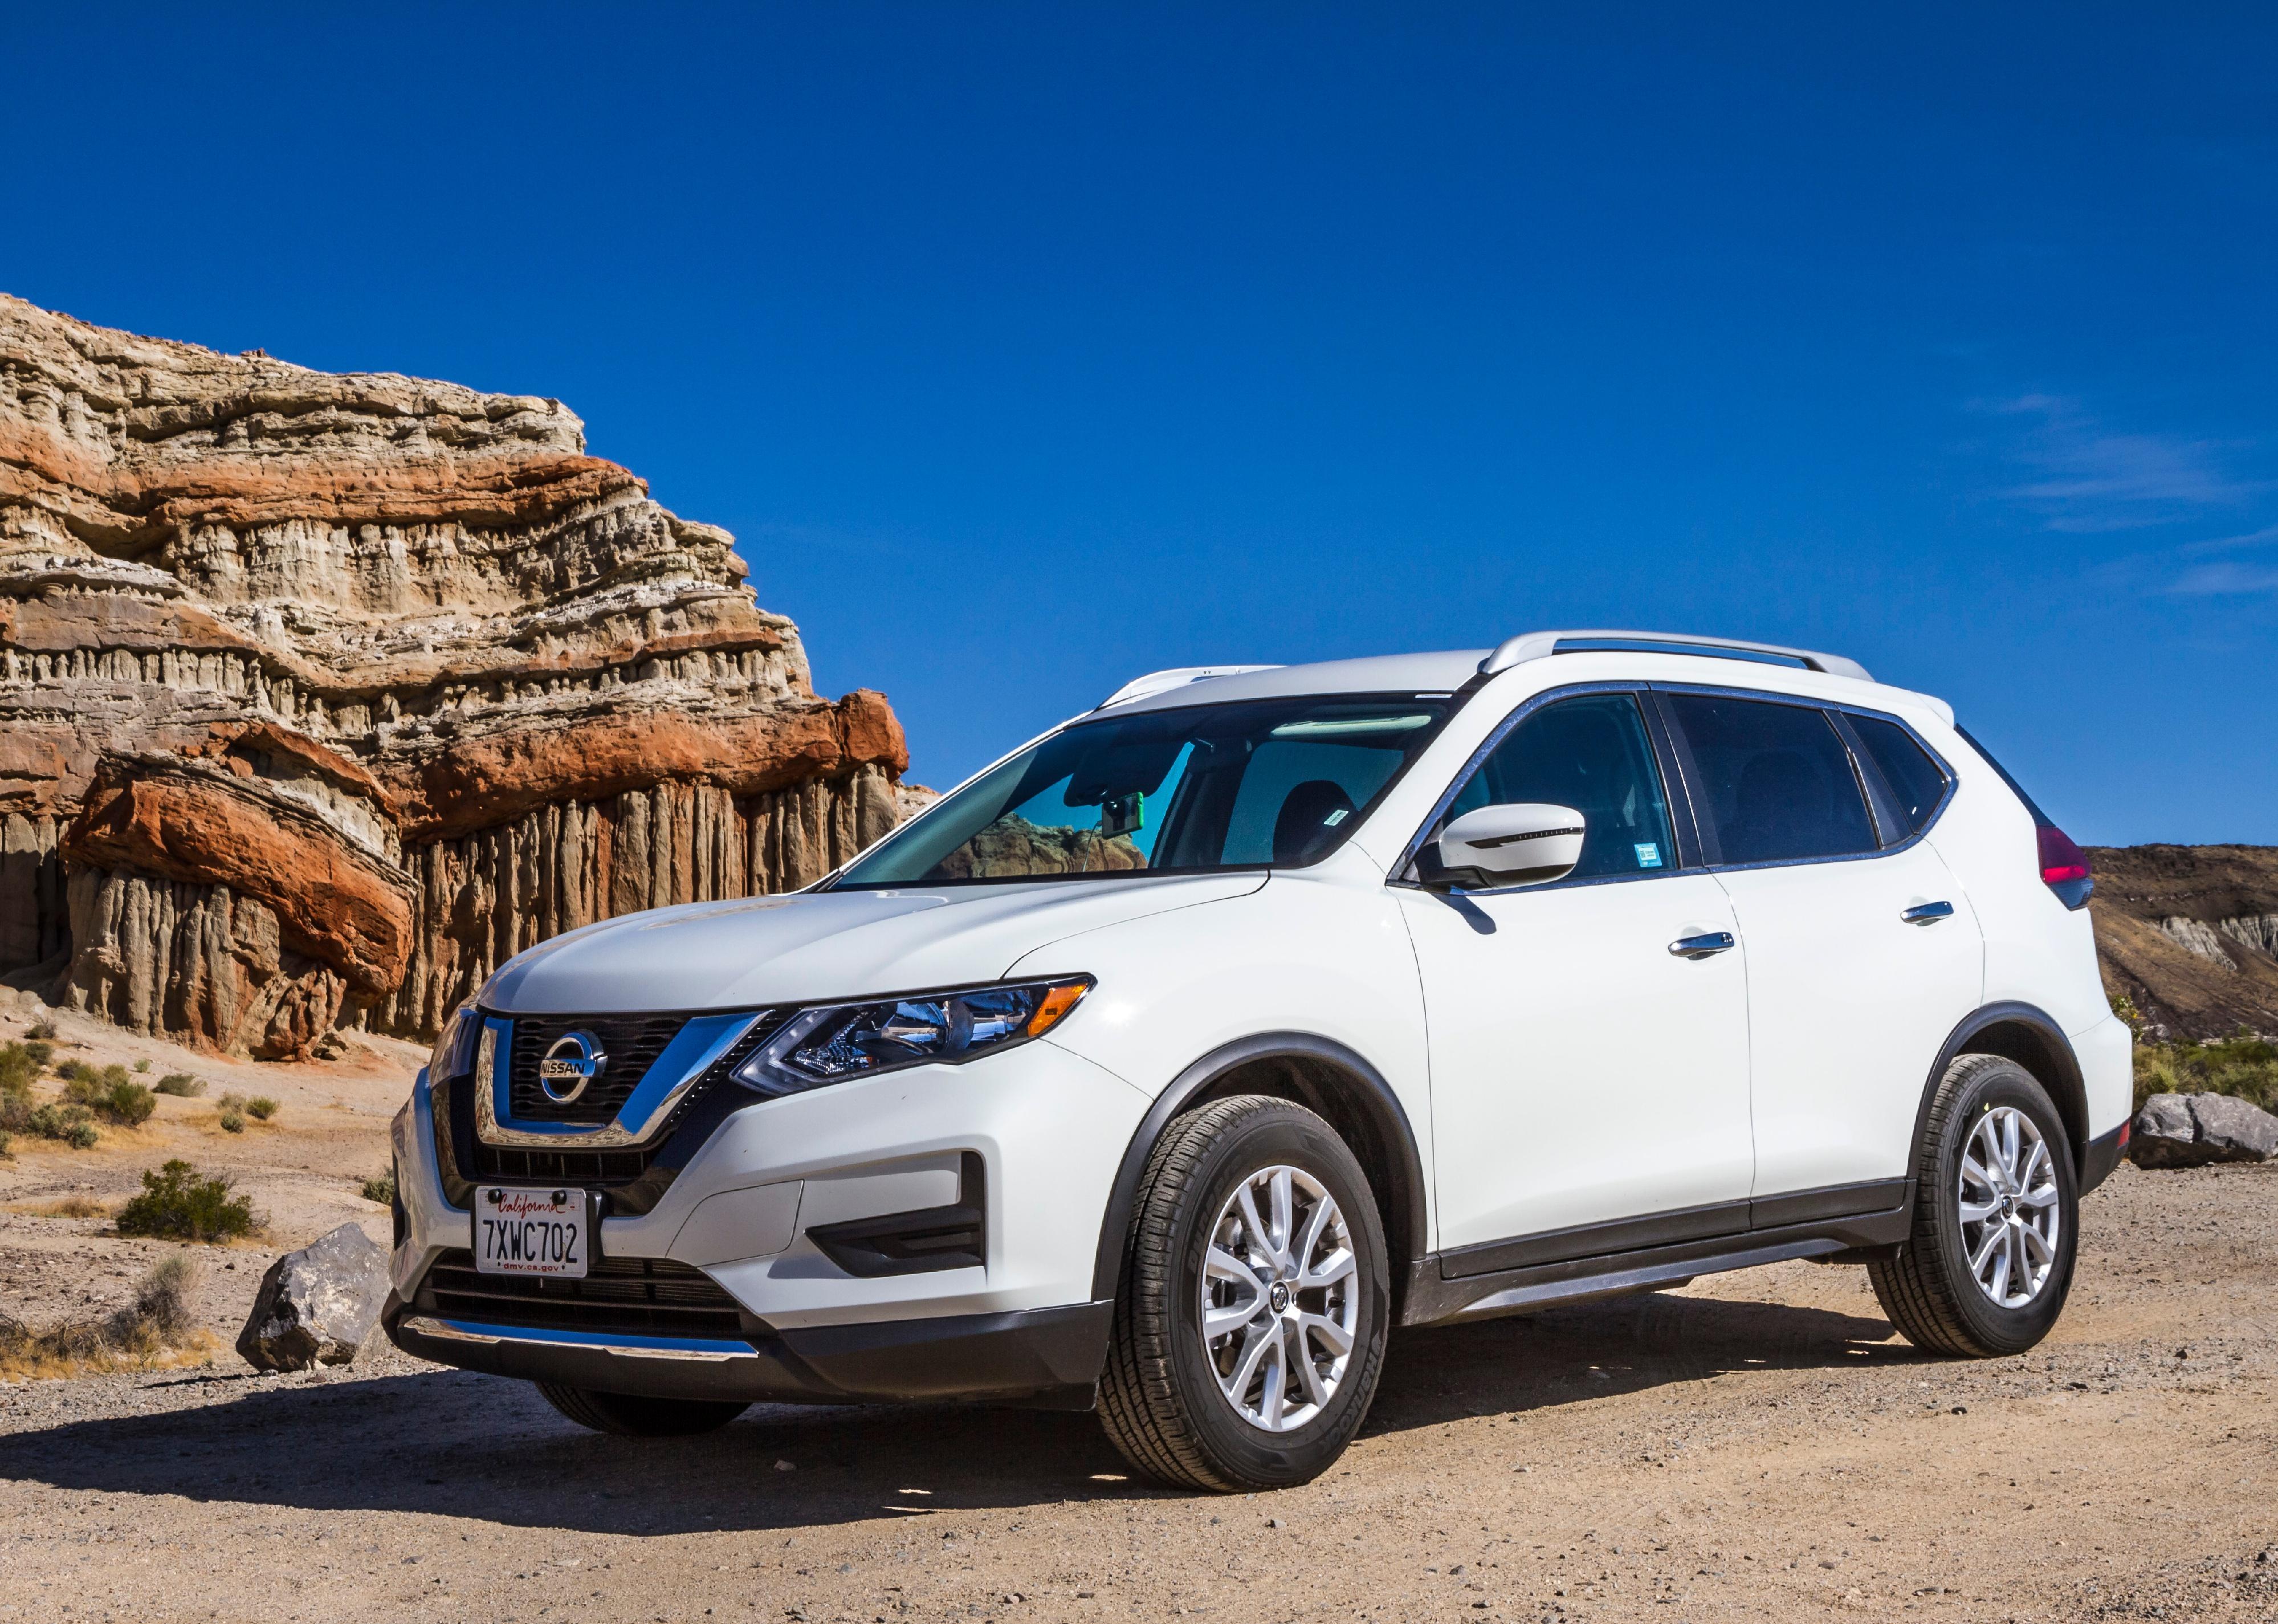 White Nissan Rogue on gravel road in front of sandstone formation.